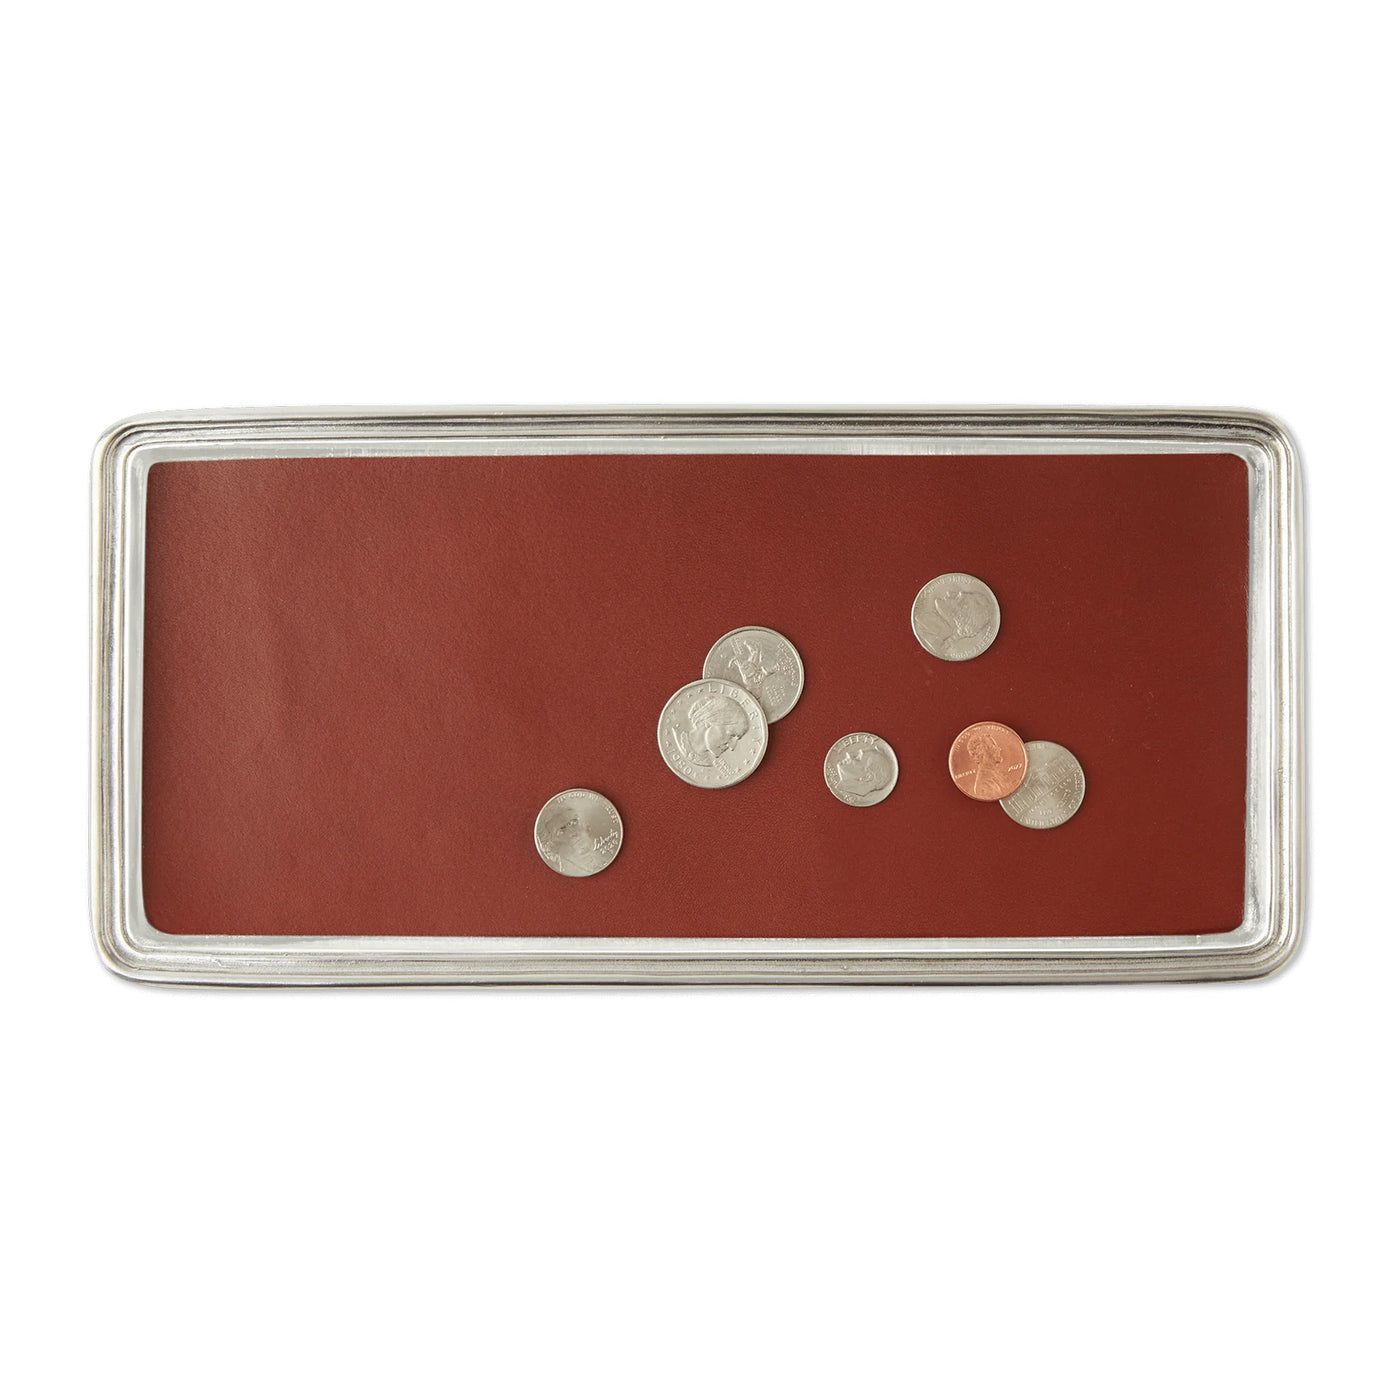 Vanity Tray With Leather Insert